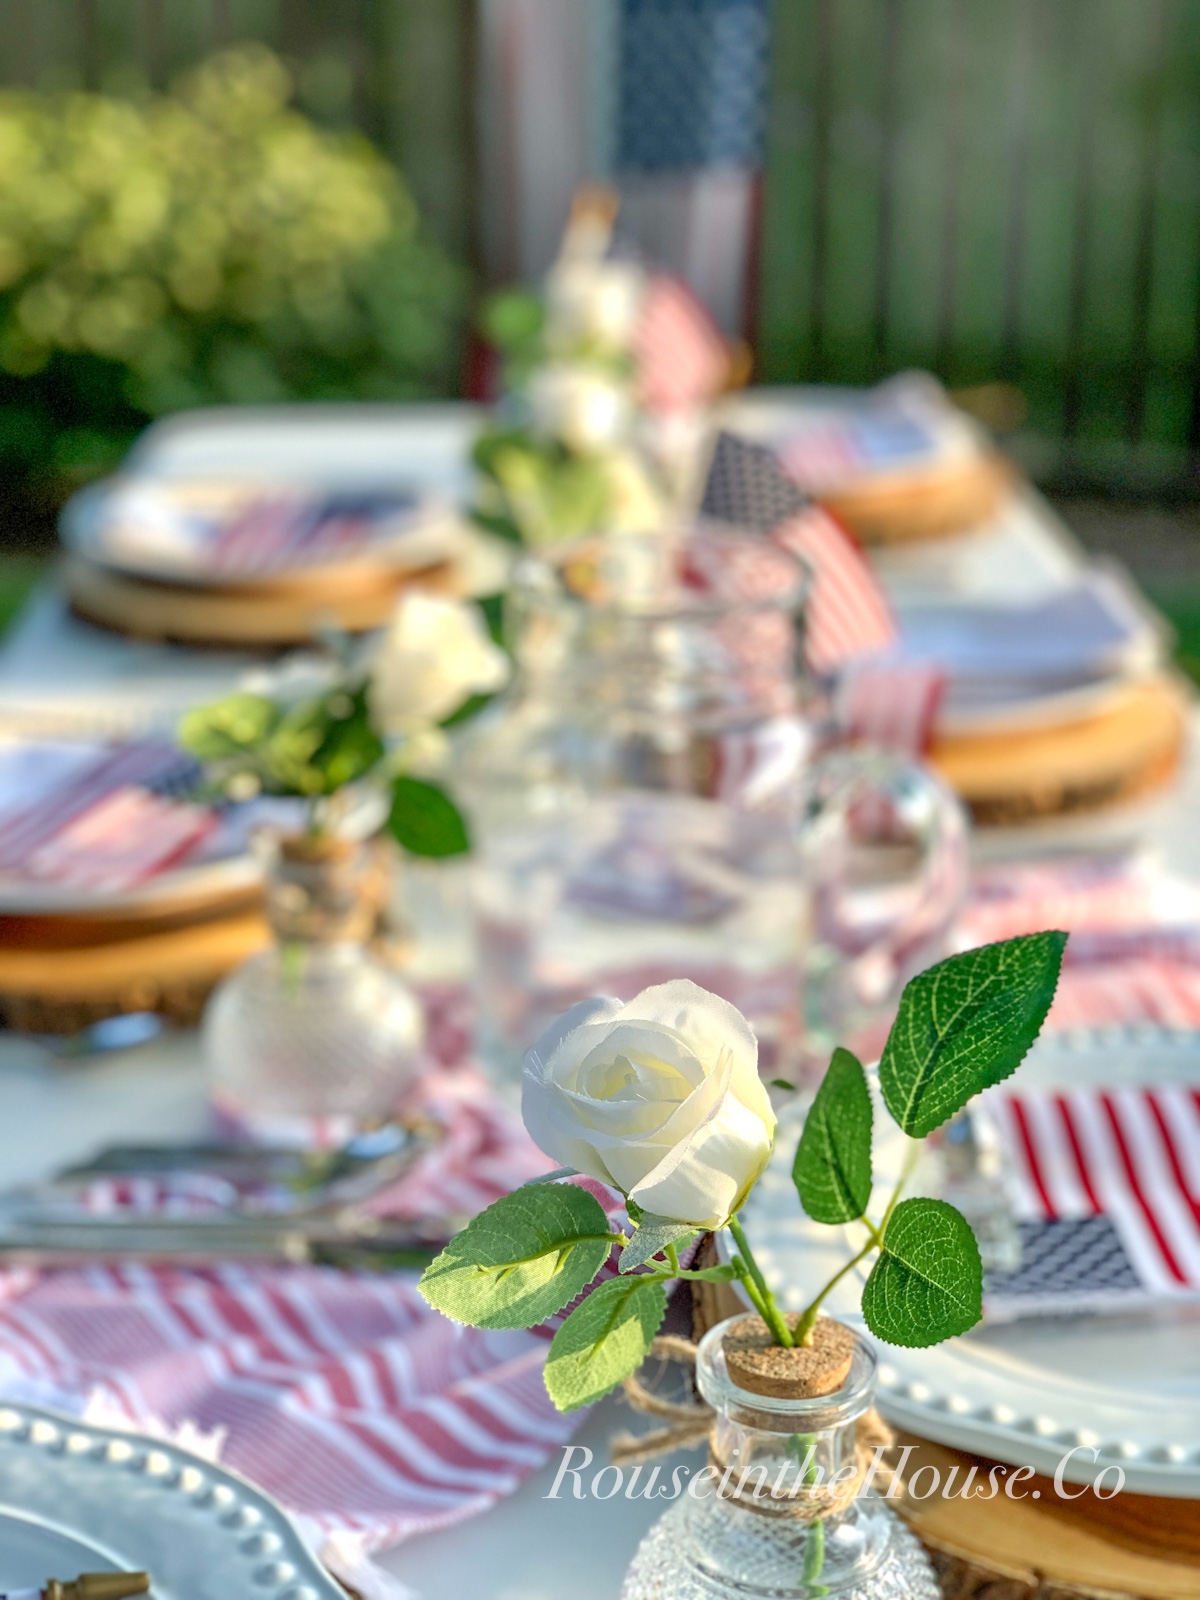 A white rose arrangement is part of a centerpiece on a patriotic tablescape on the patio.  An American flag hangs in the background on the fence.